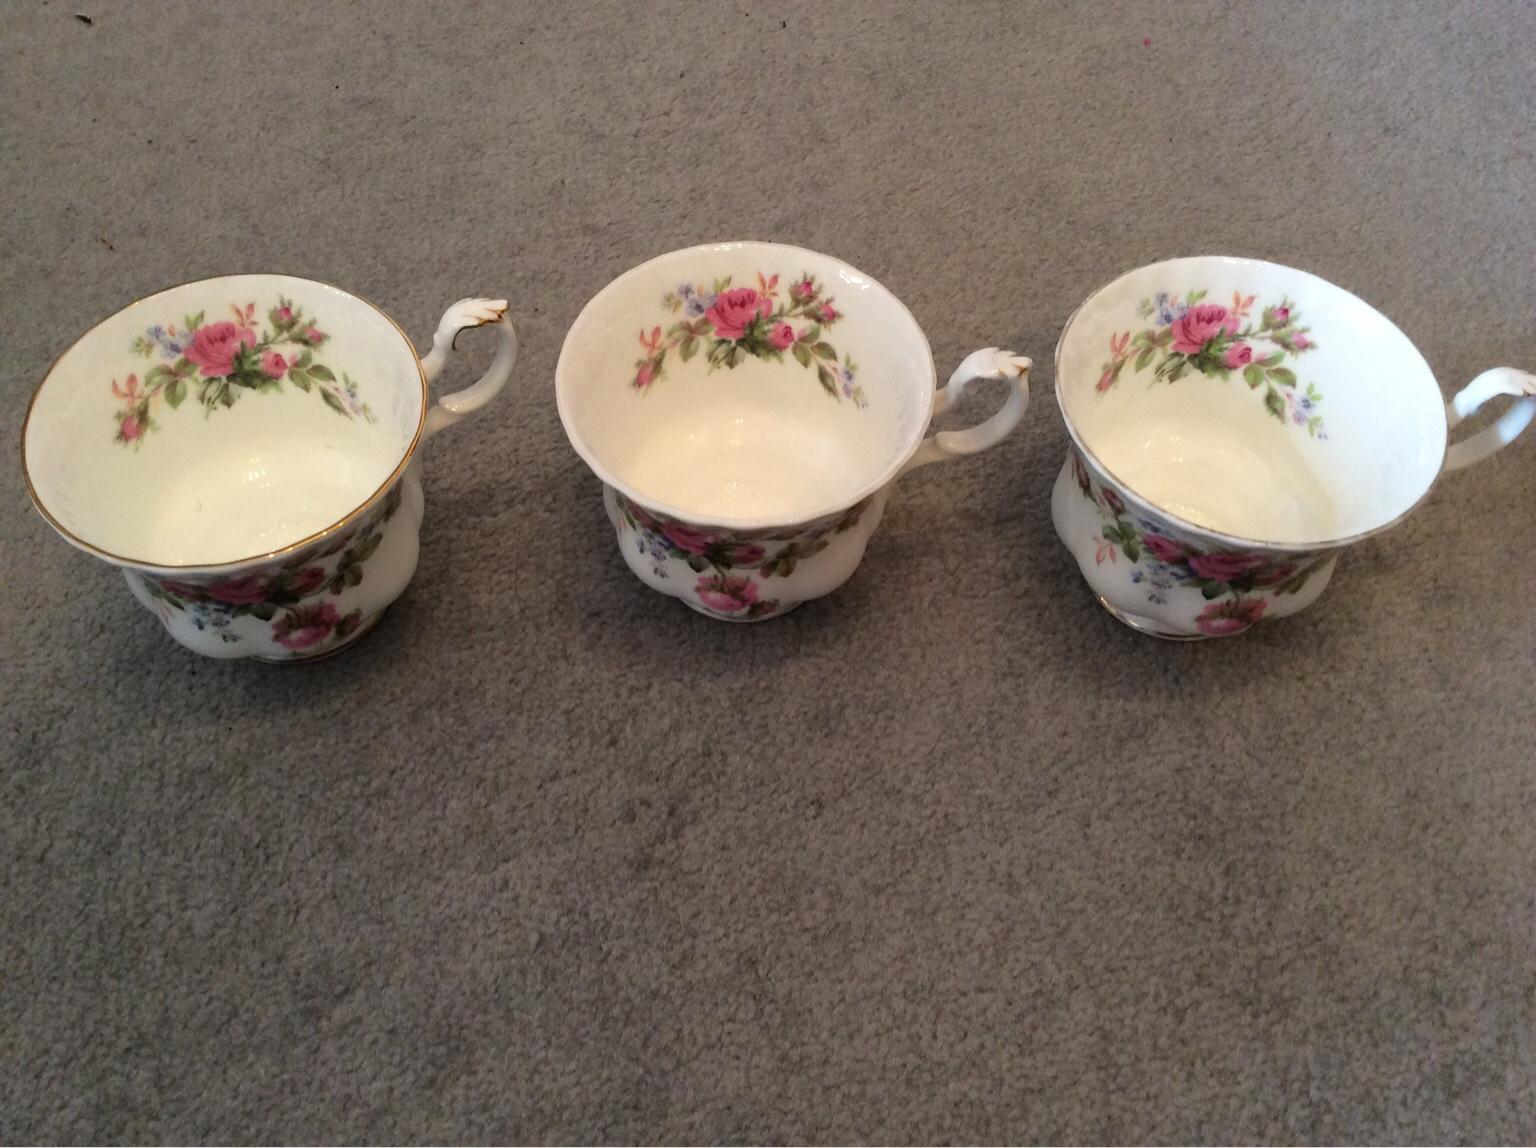 Royal Albert Bone China Moss Rose Tea Cups In Ws9 Lichfield For 15 00 For Sale Shpock